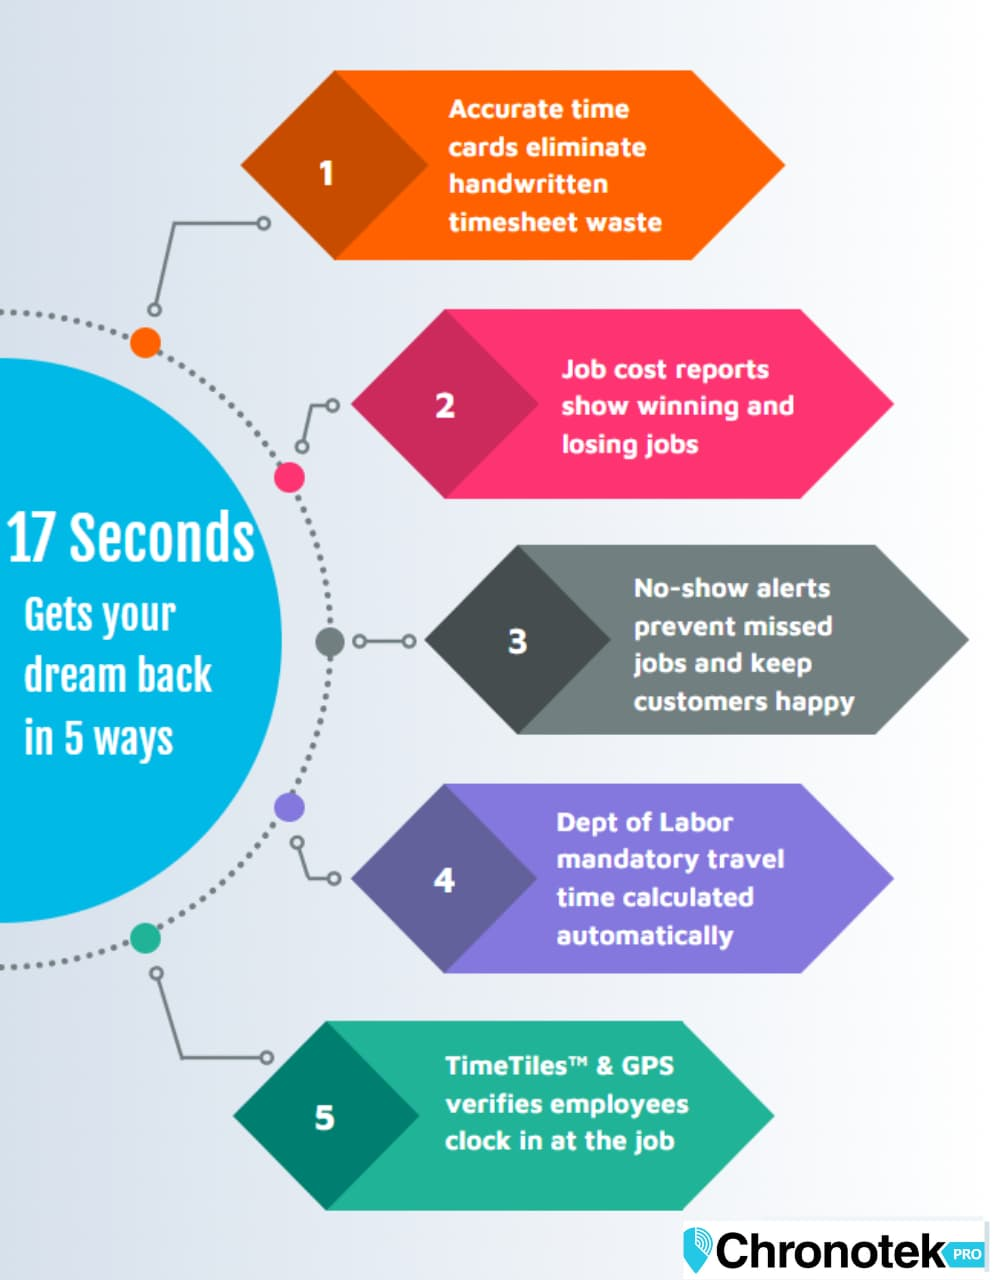 How Chronotek Pro solves your remote employee problems